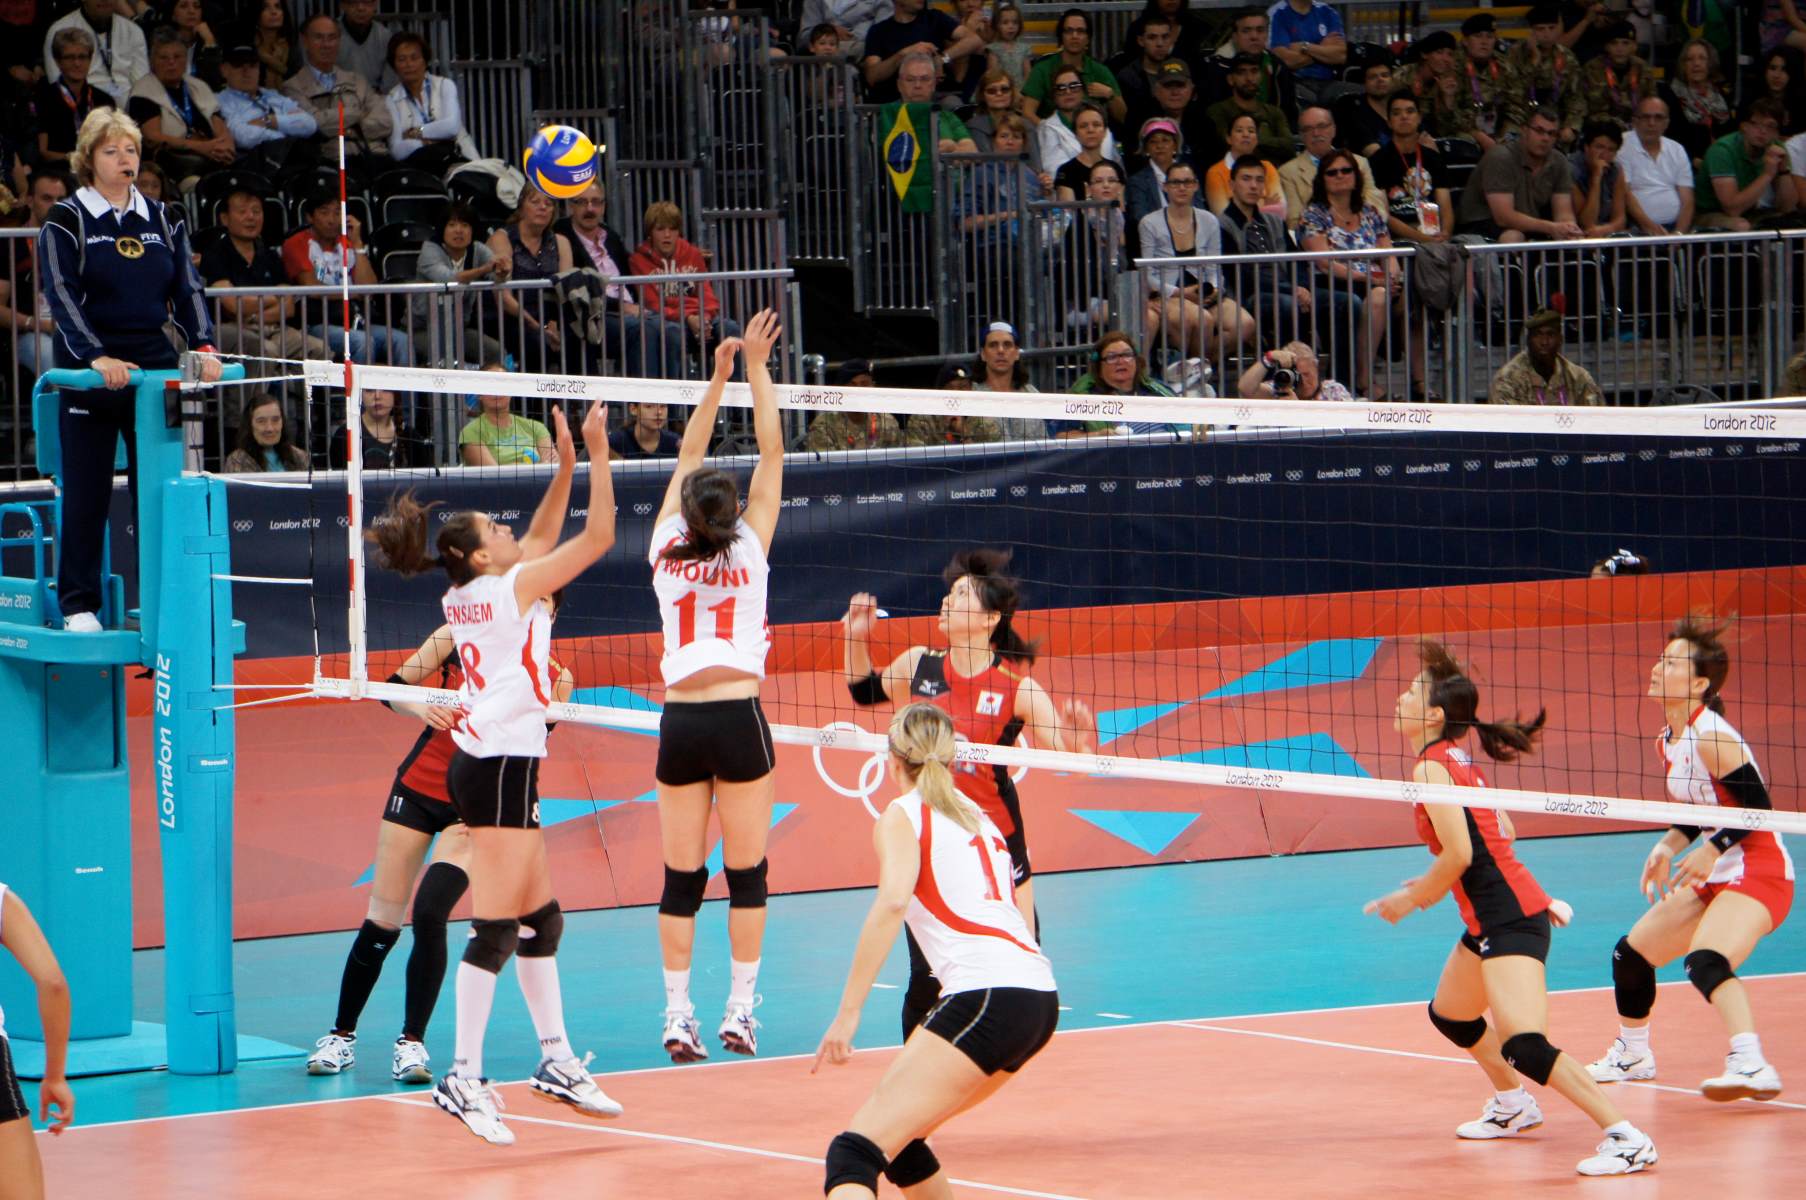 What Components Of Athletic Performance Are Required For Volleyballl